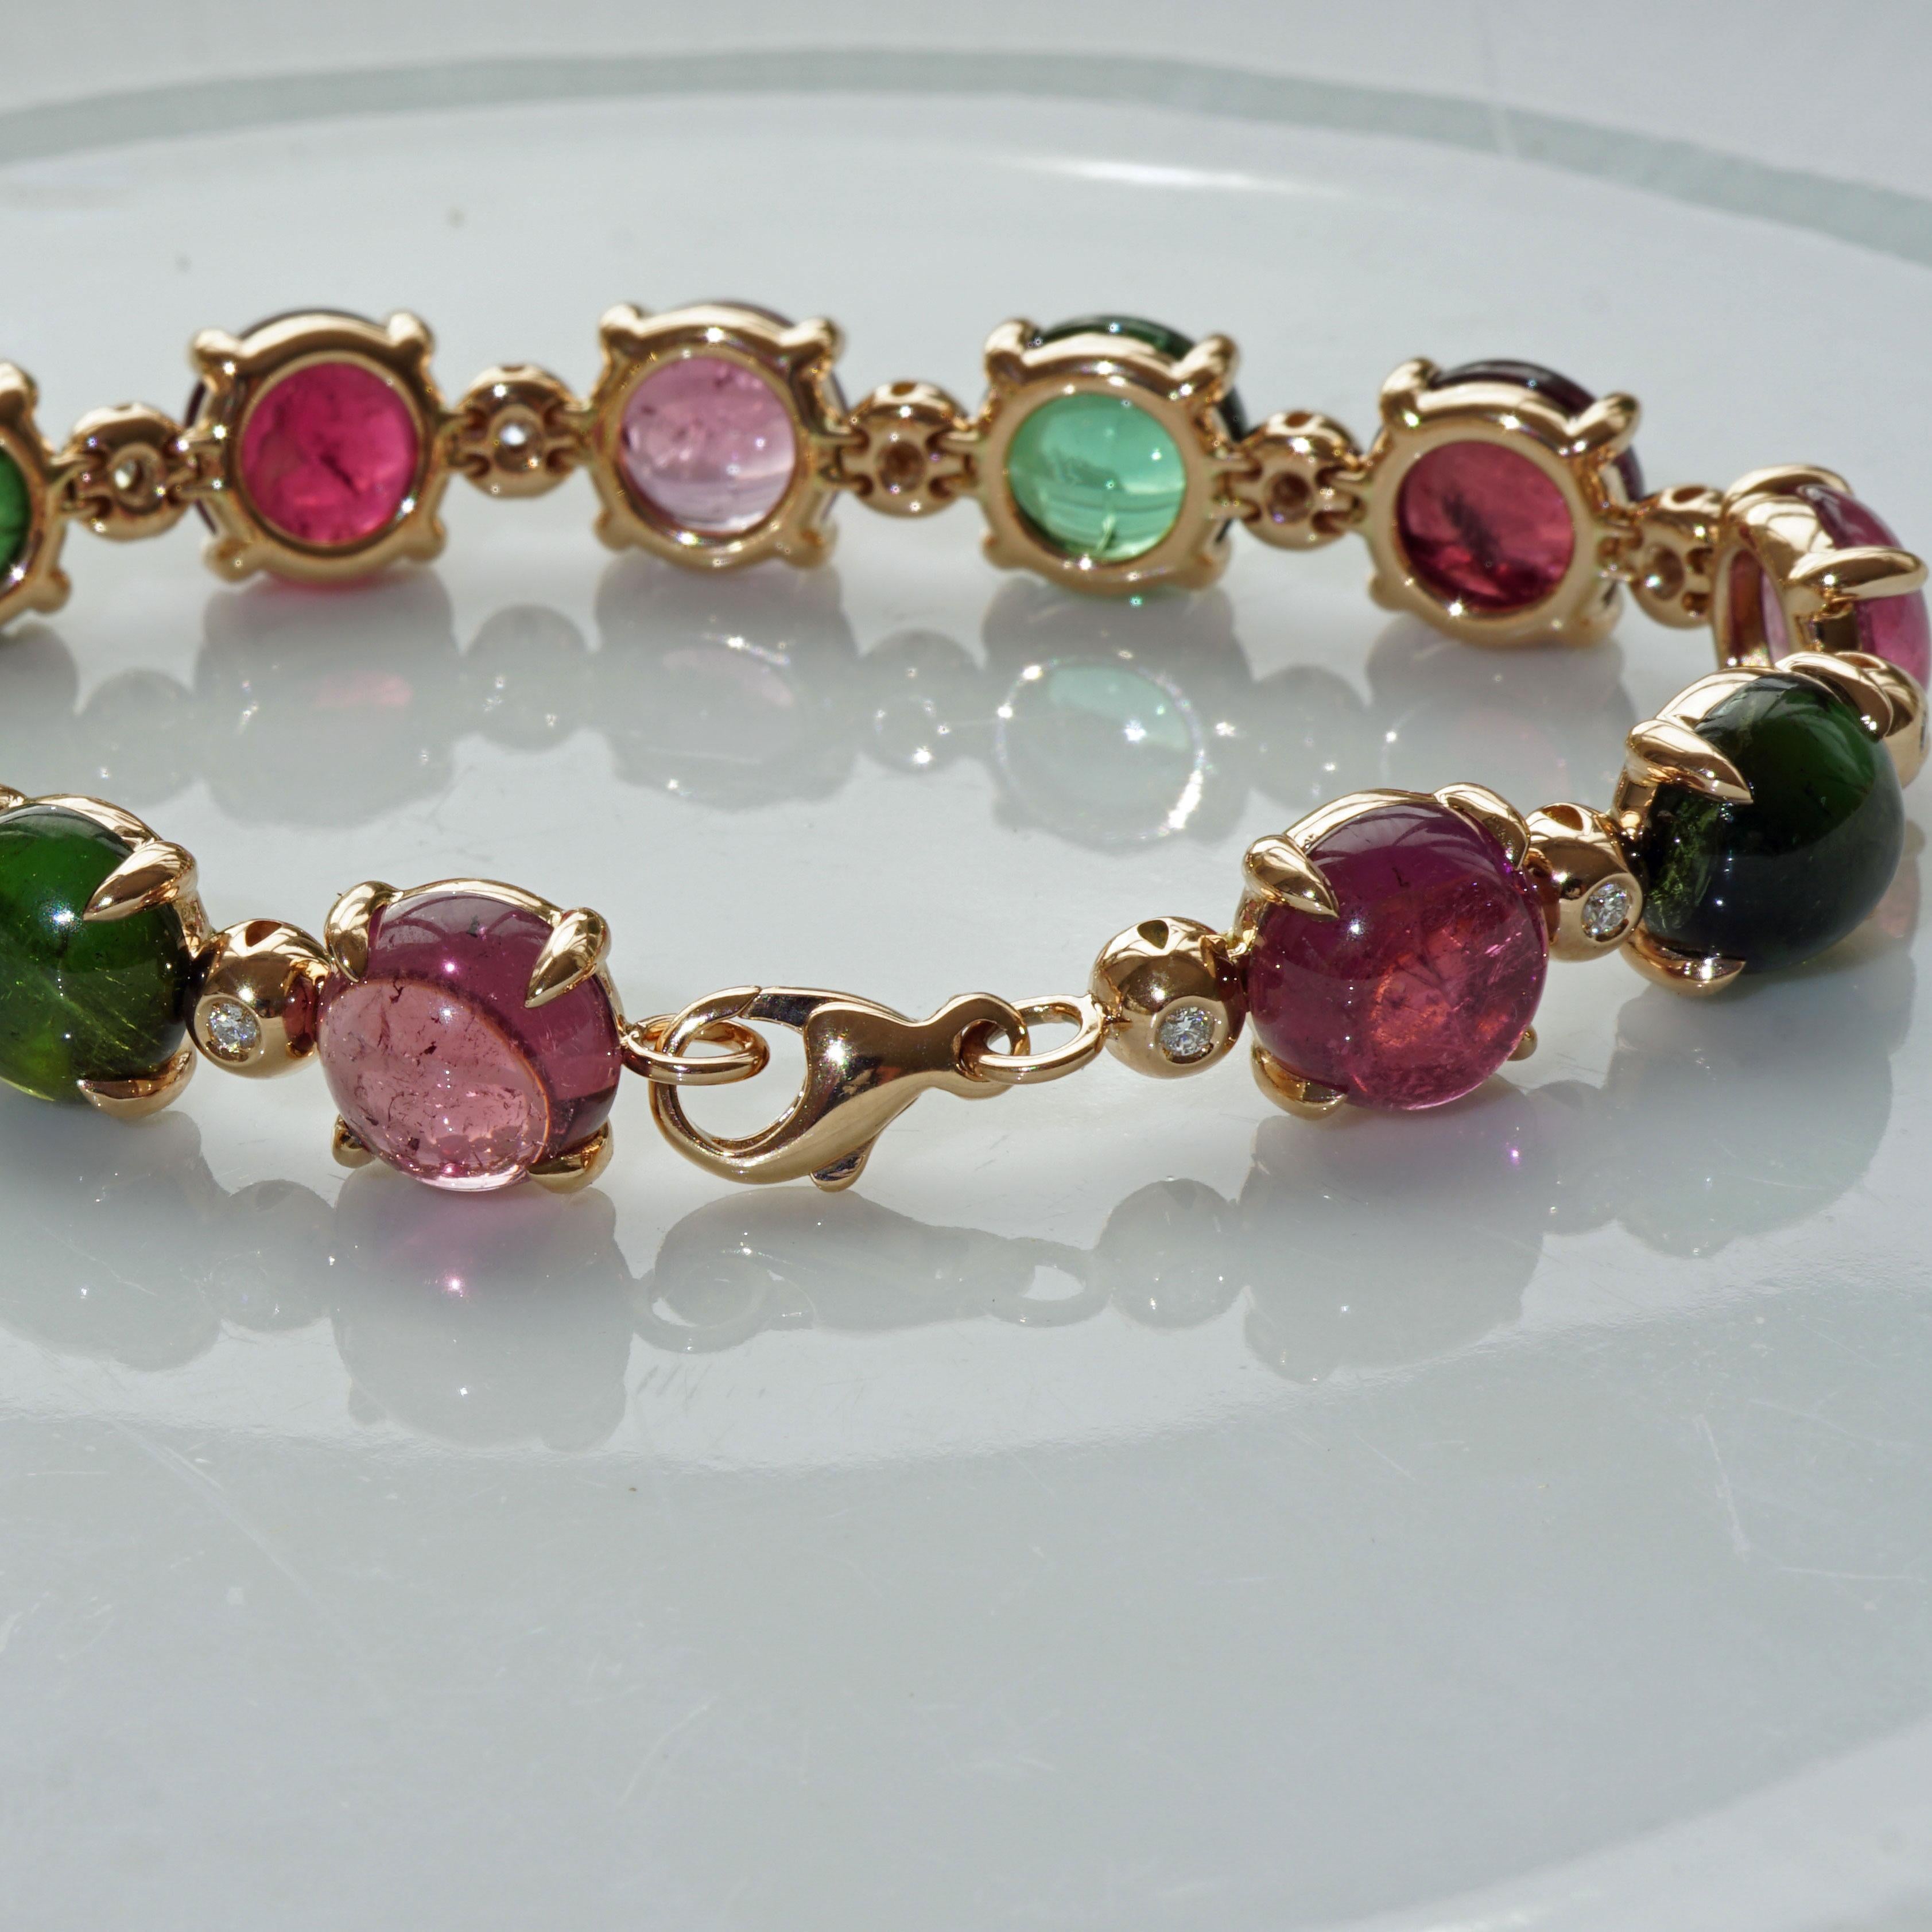 Modern Tourmaline Bracelet Multicolor 50 Ct Transparency and Luminosity TOP 18kt For Sale 6